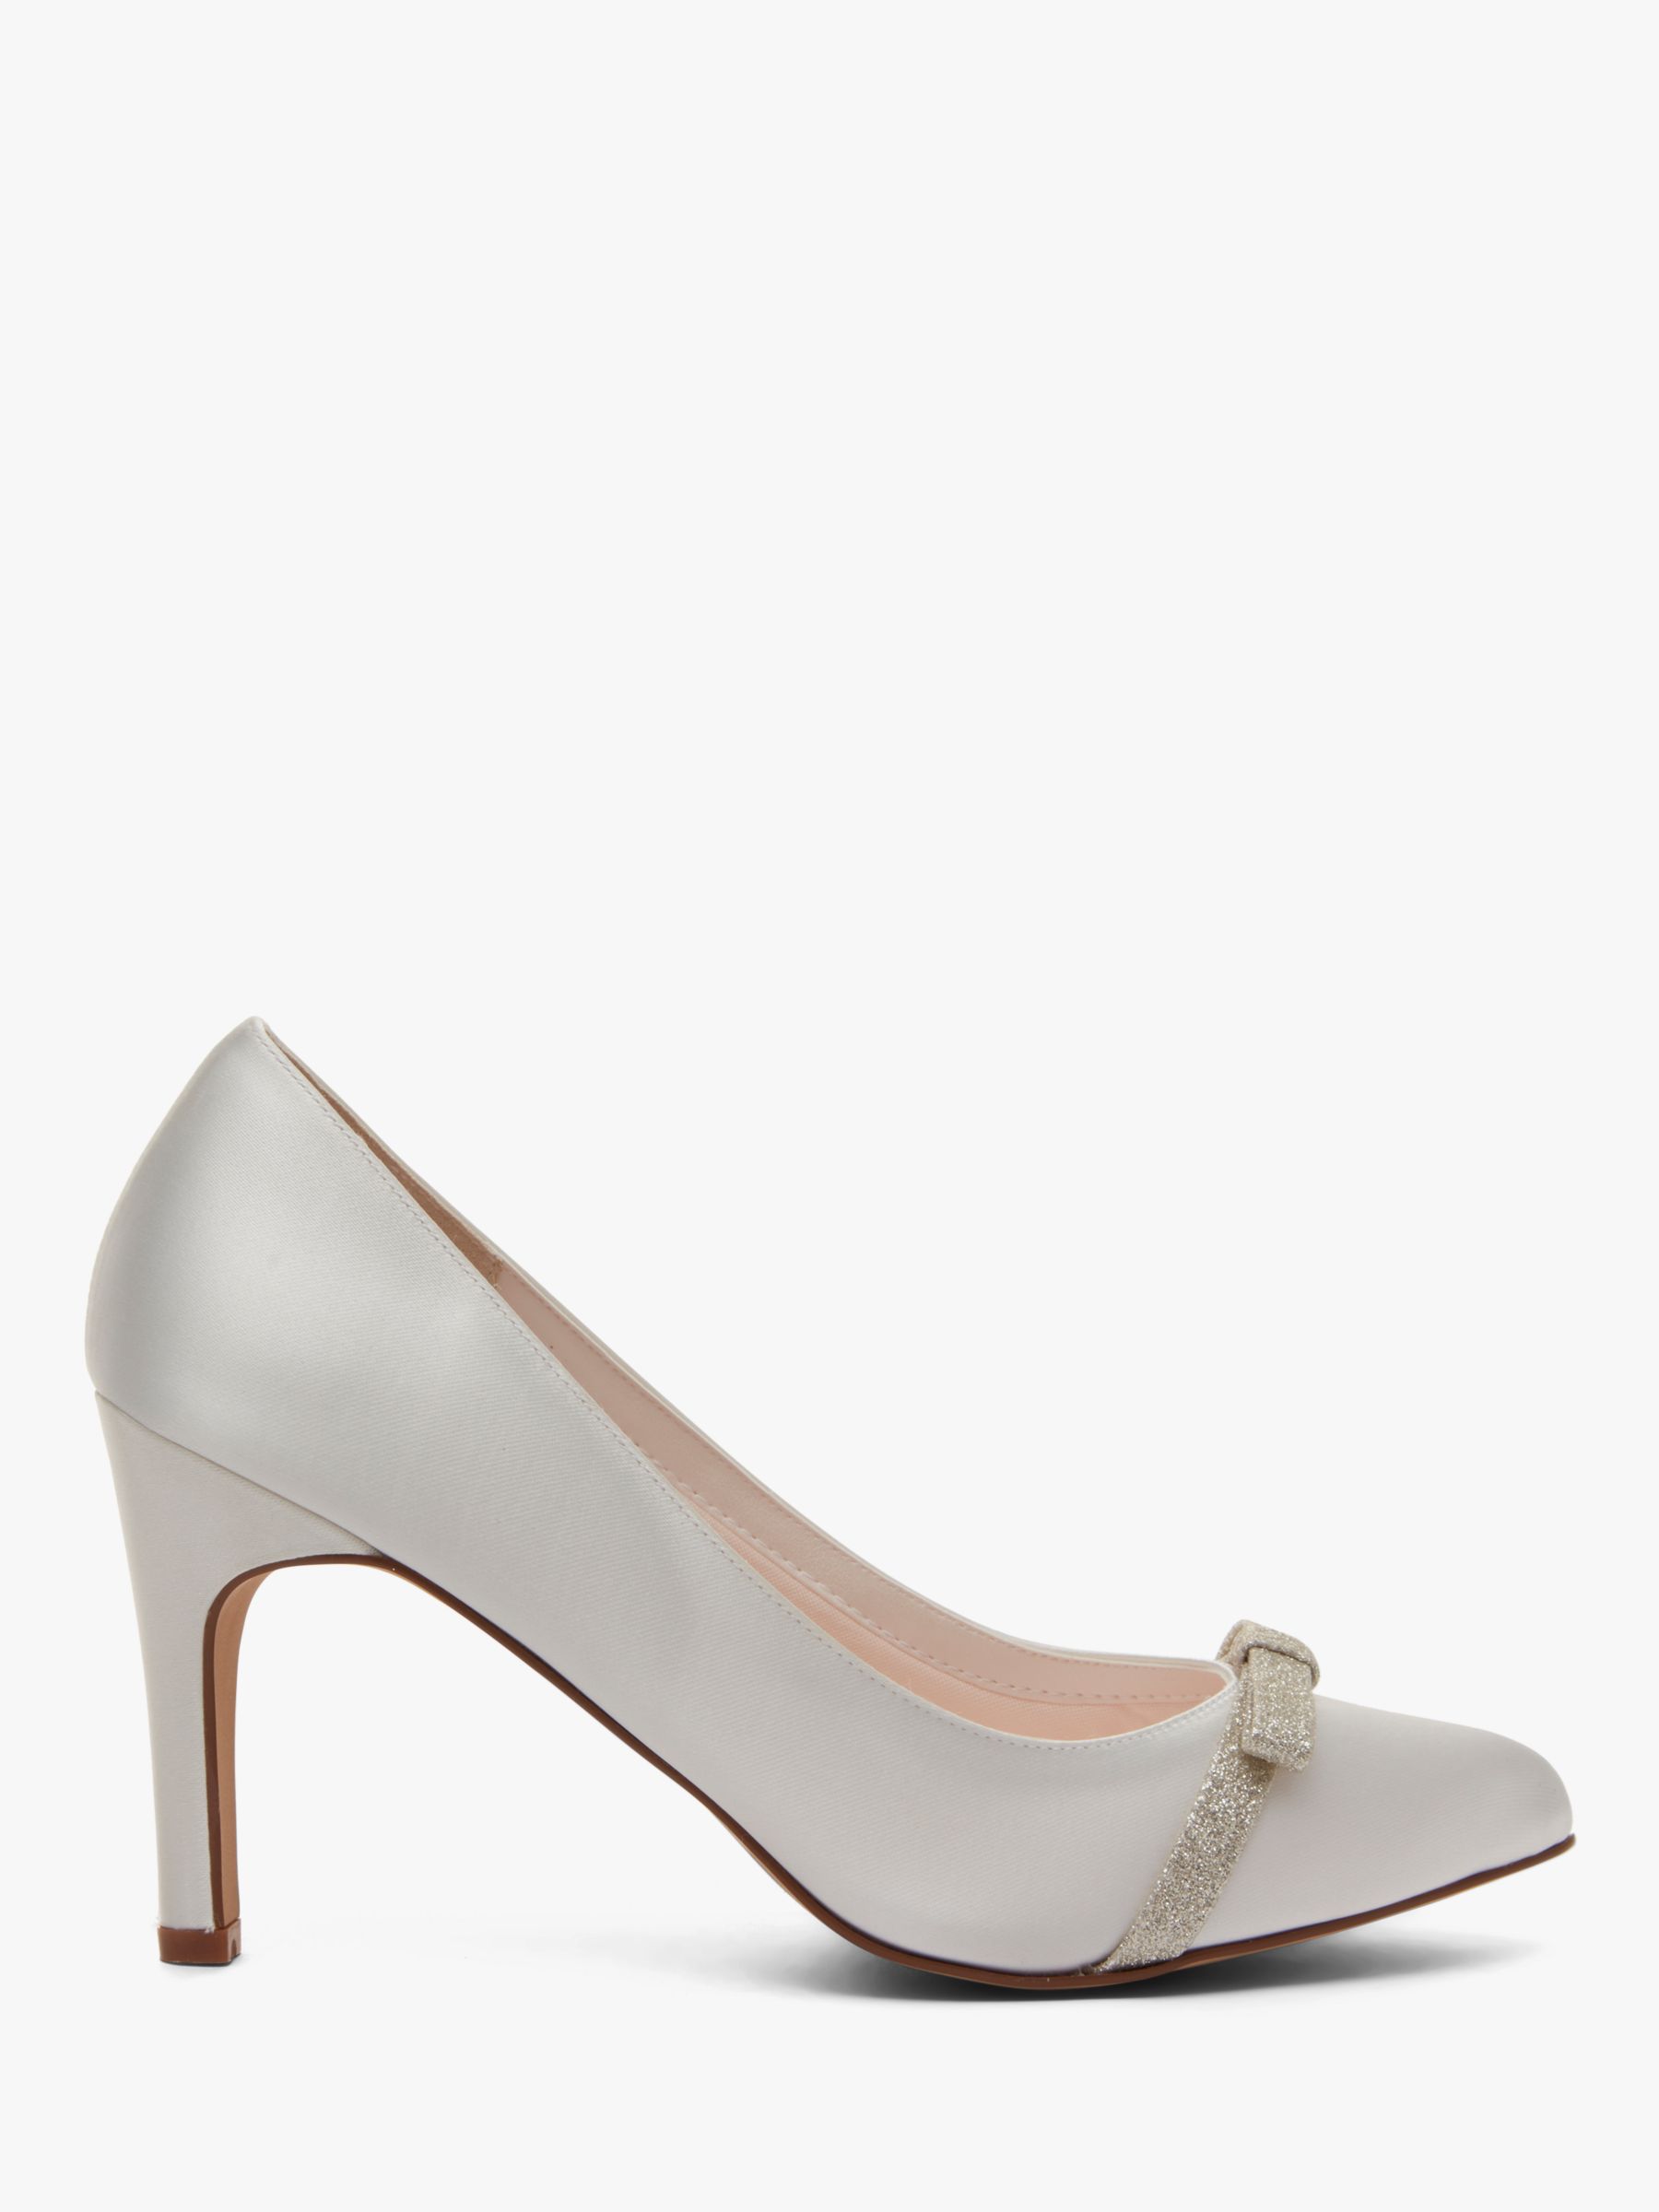 Rainbow Club Caprice Bow Court Shoes, Ivory at John Lewis & Partners